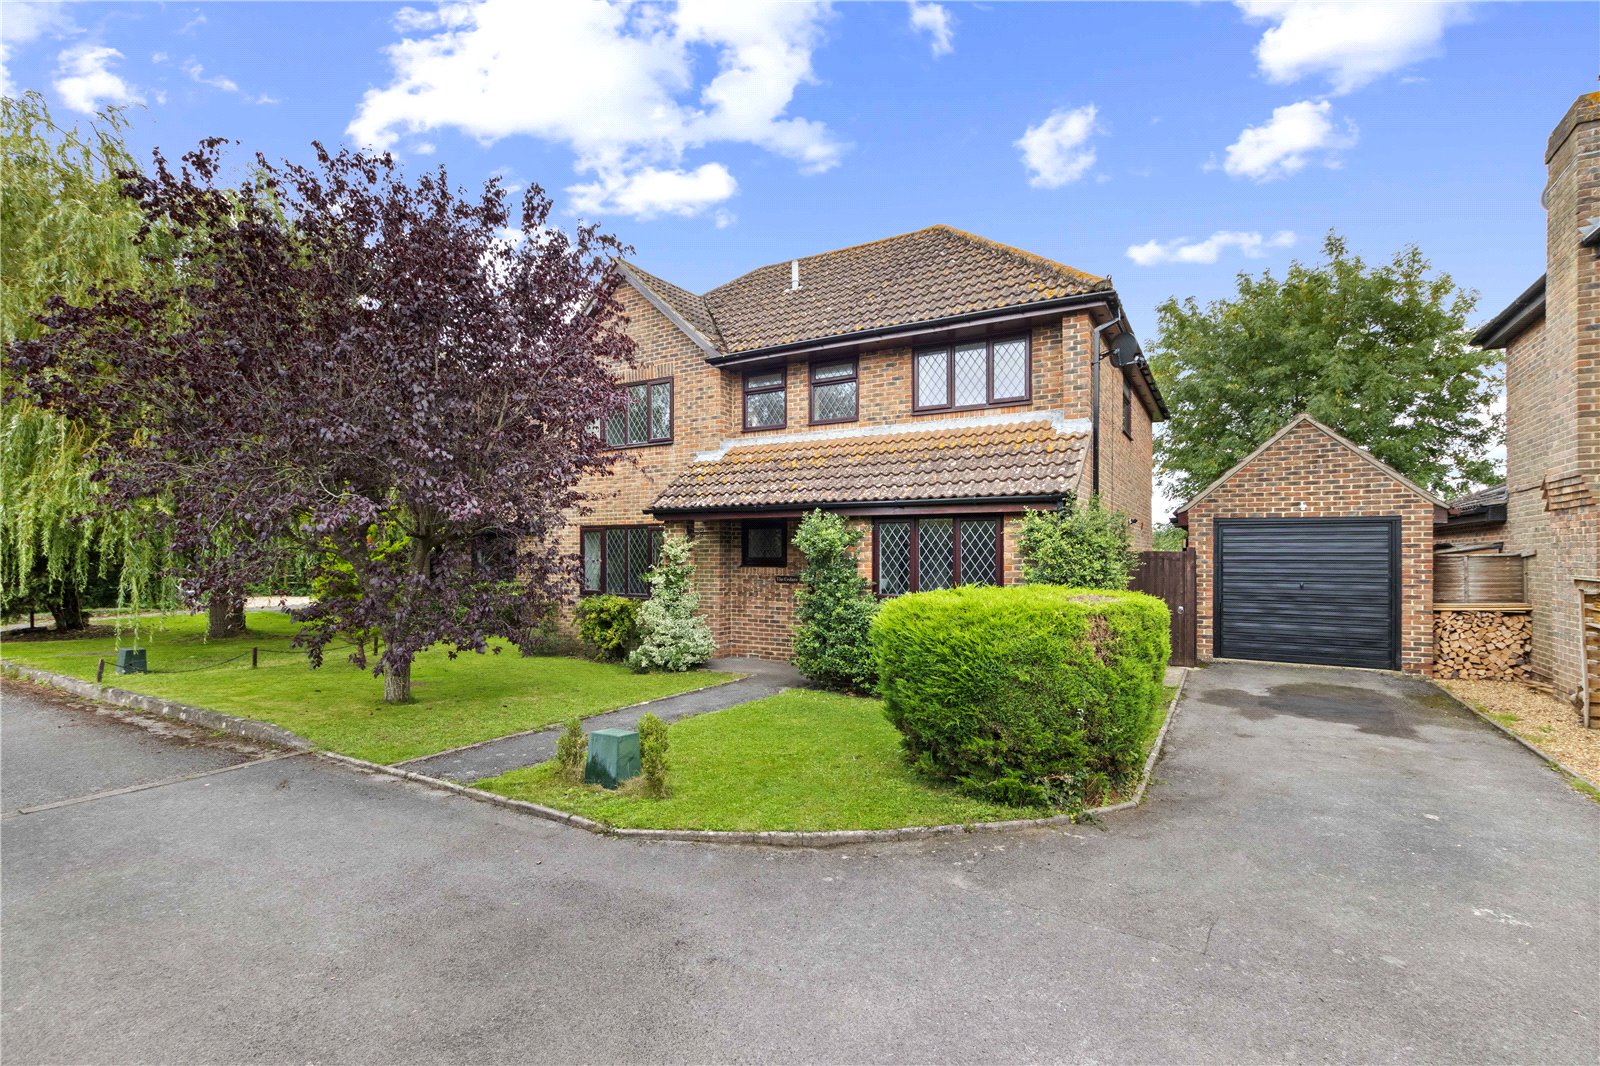 4 bed house for sale in Conifer Drive, Hambrook - Property Image 1